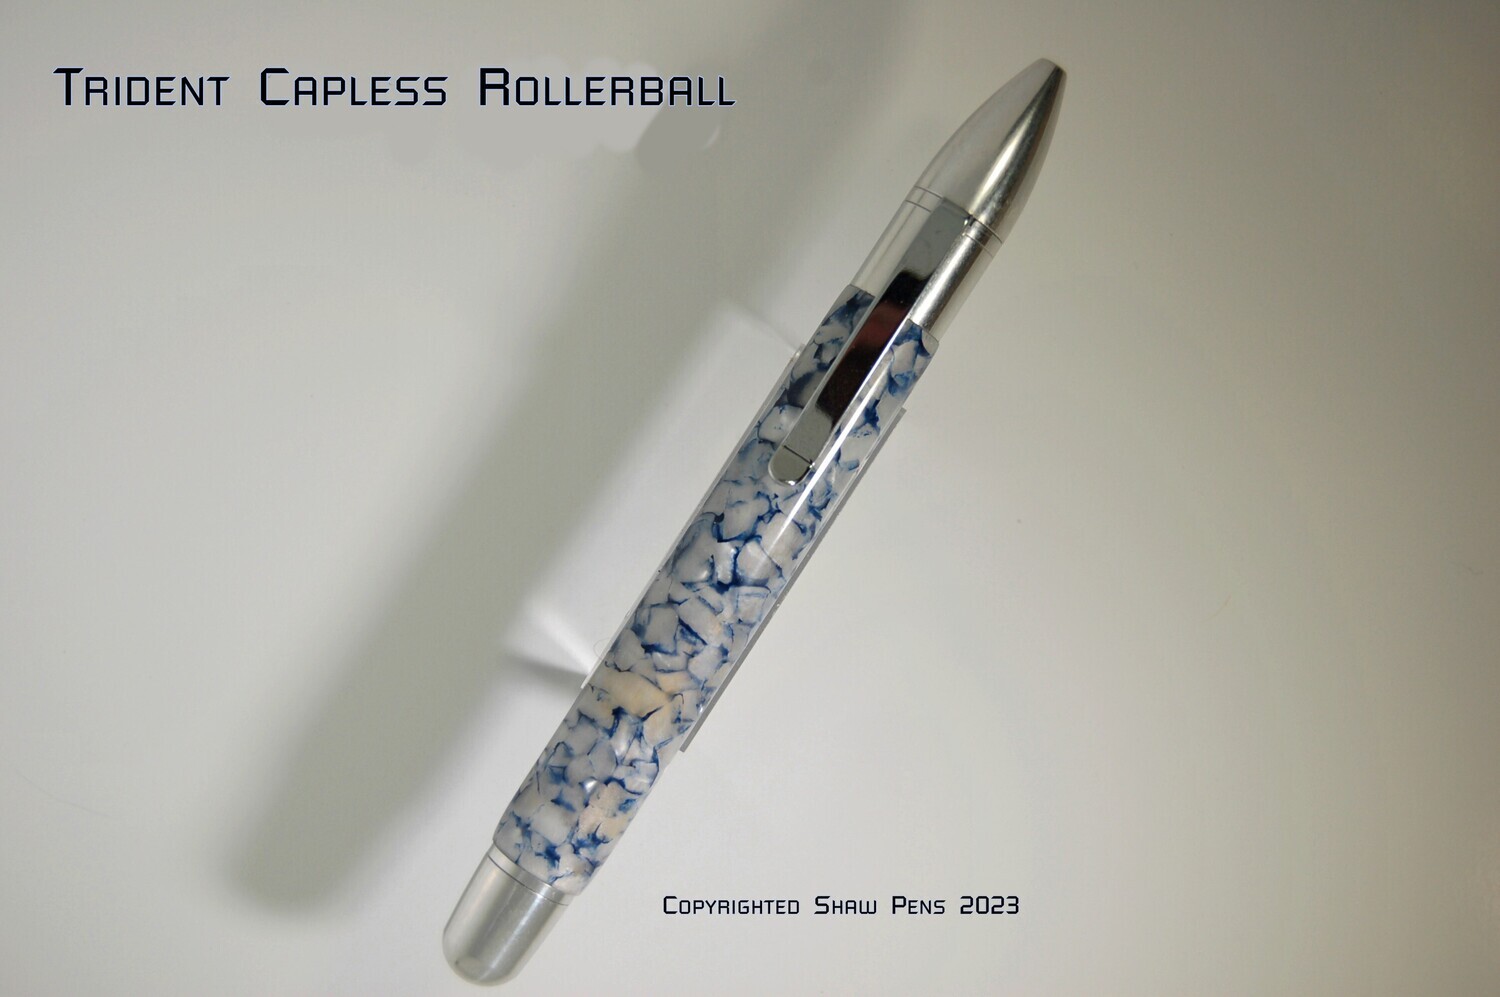 Trident Capless Rollerball Blue and White ice in Aluminum